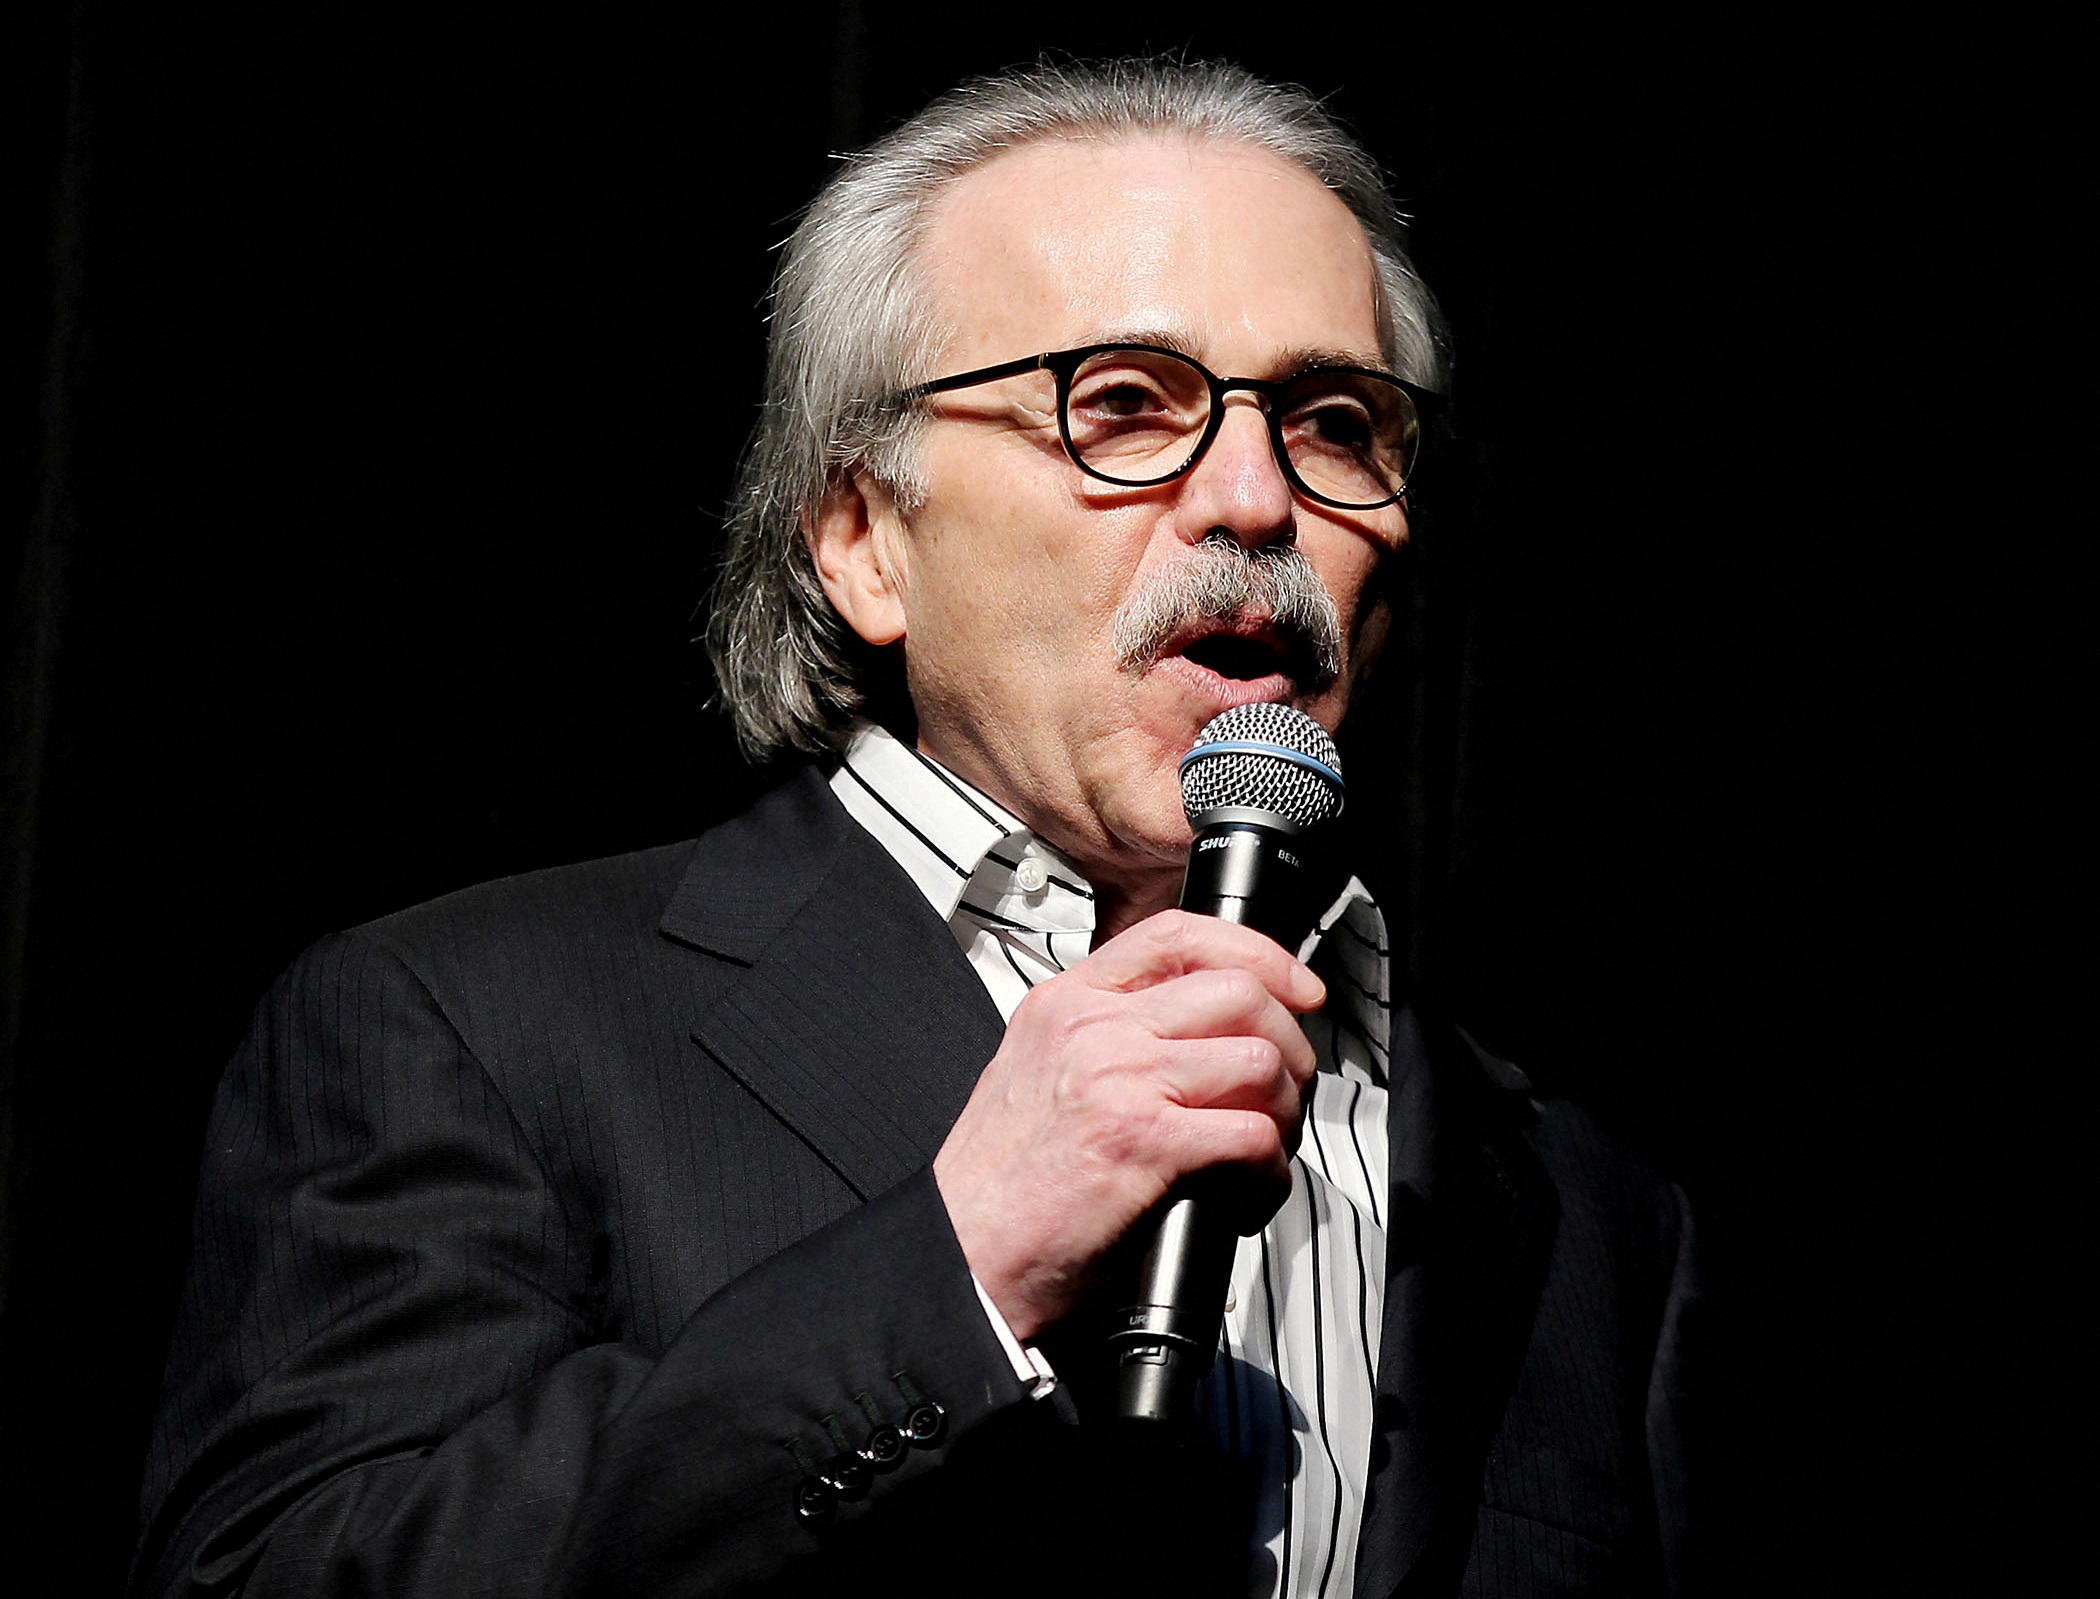 David Pecker, chair and CEO of American Media, speaks at the Shape and Men's Fitness Super Bowl Party in New York